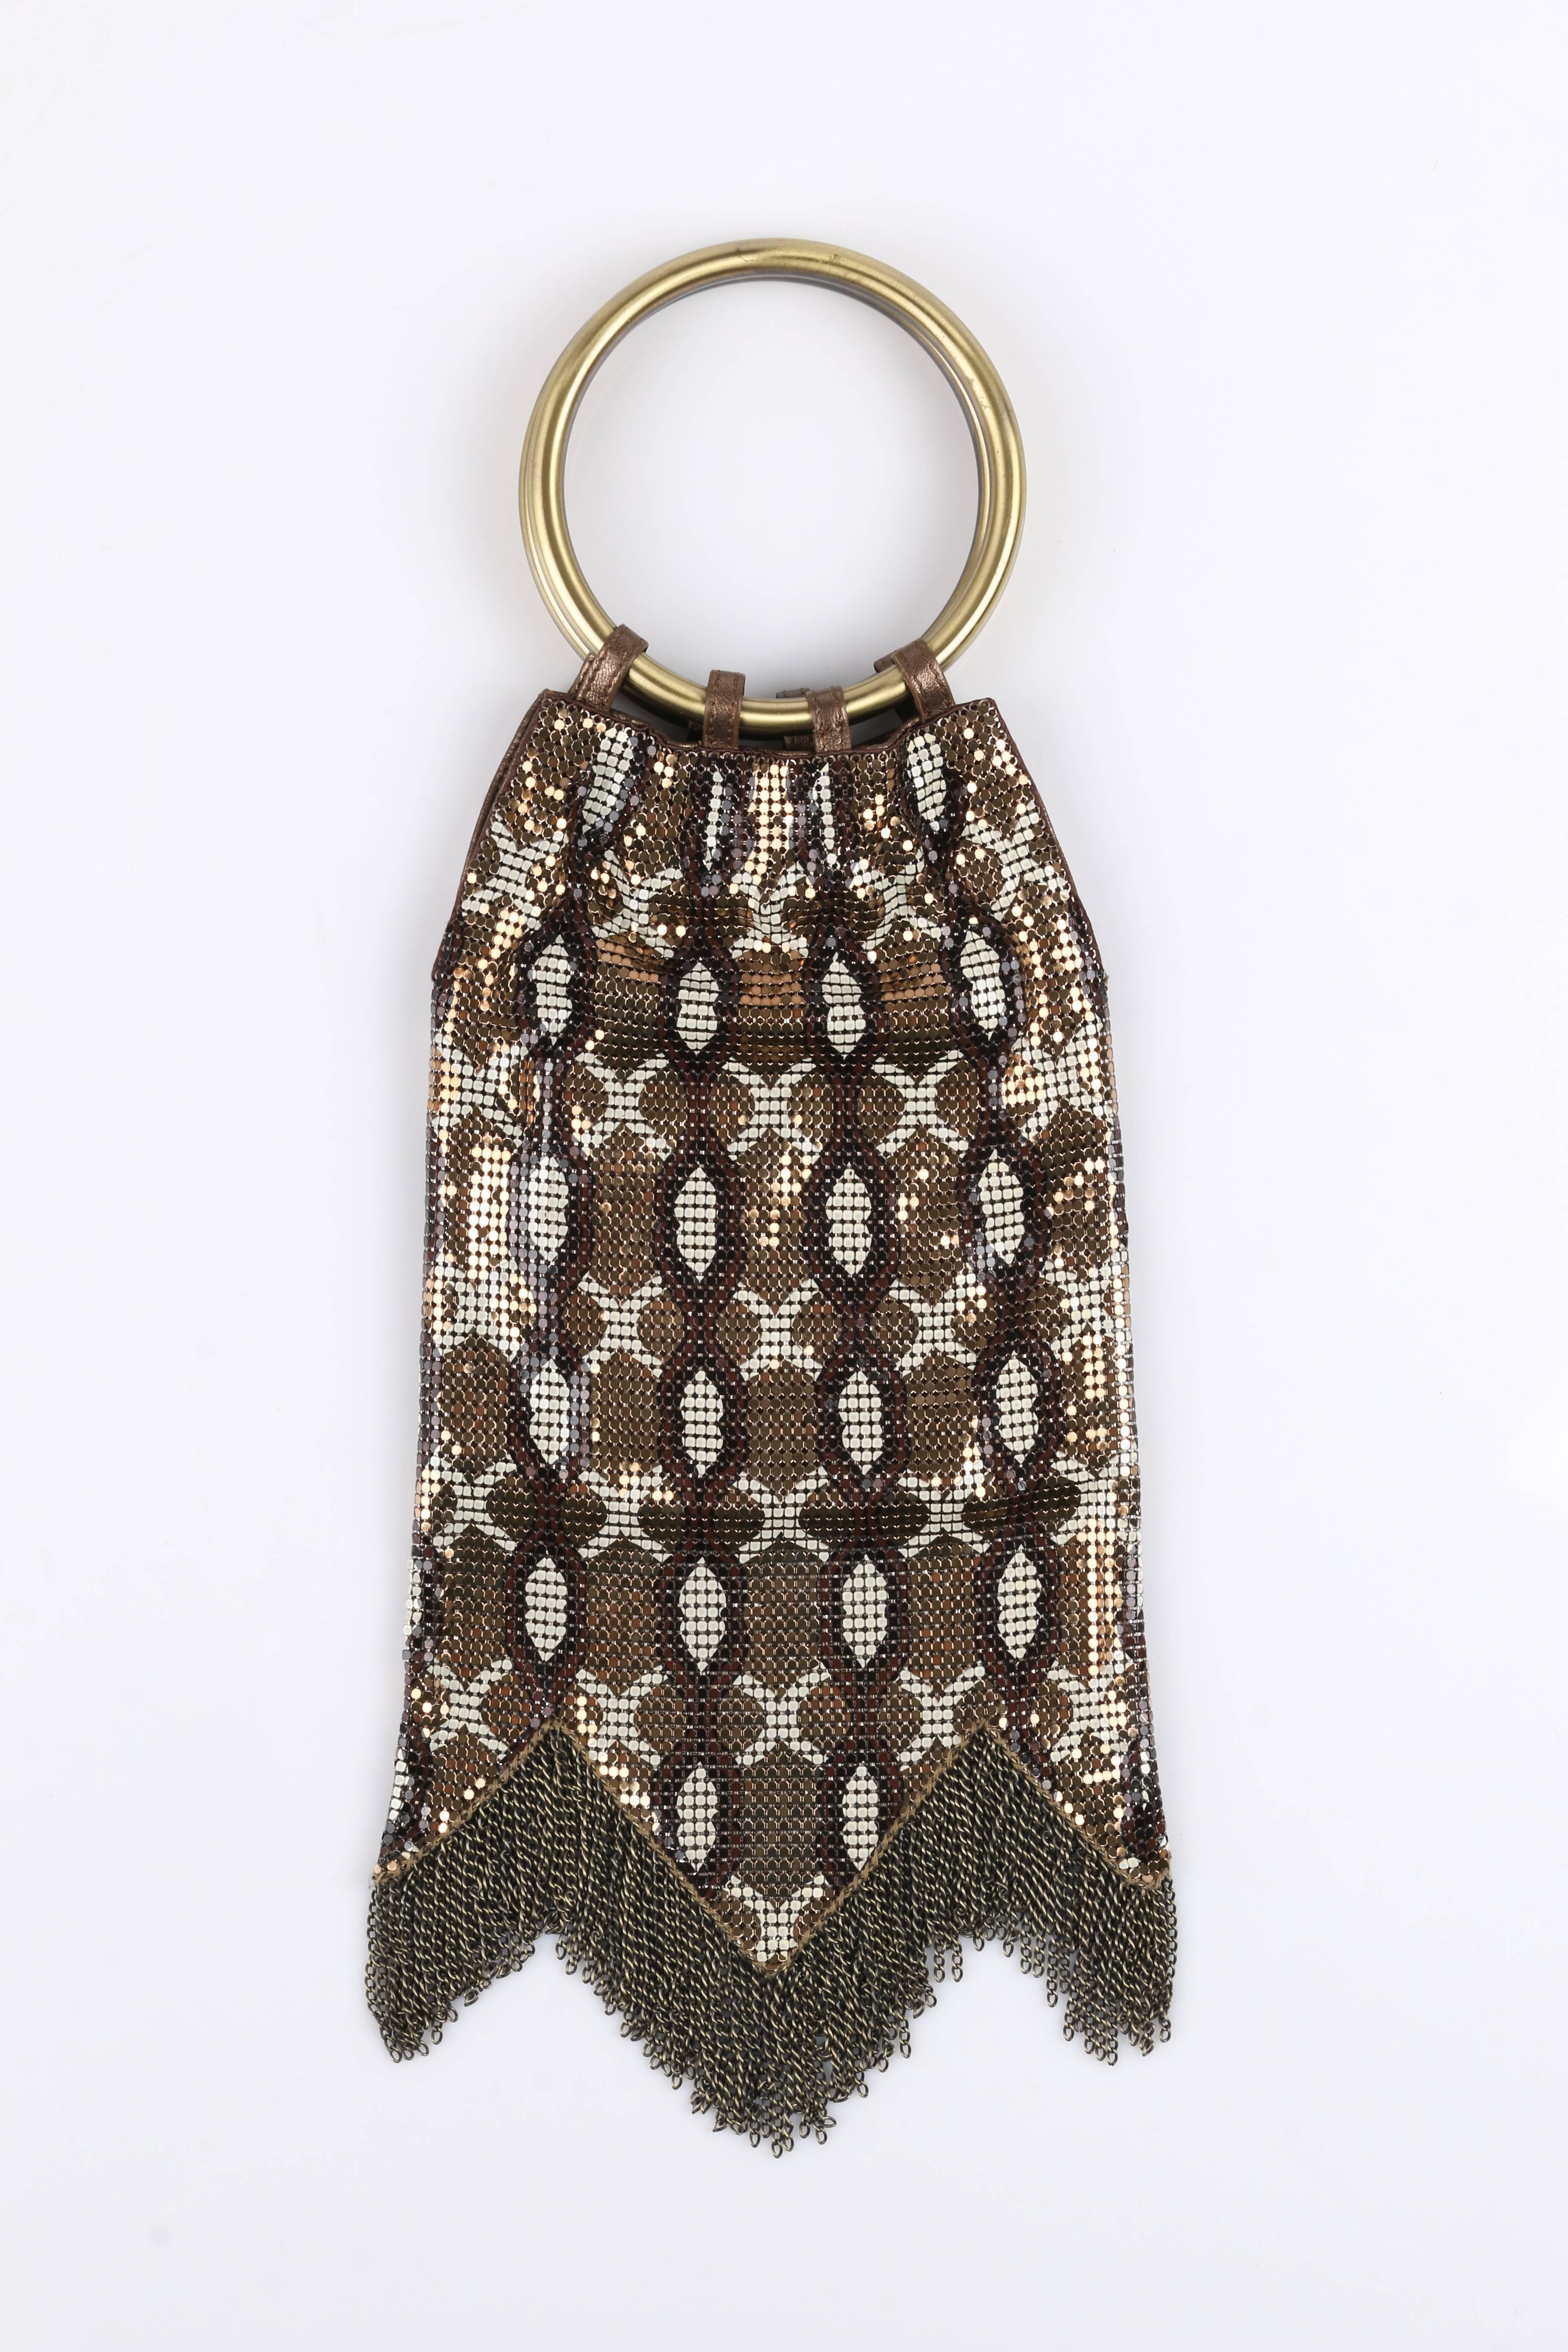 Rare Whiting & Davis metal mesh evening bag. Gold, brown, and ivory snake print metal mesh. Shark tooth hem with brushed gold curb chain fringe. Two gold metal ring handles. Hidden magnetic snap closure. Metallic bronze leather trim. Whiting